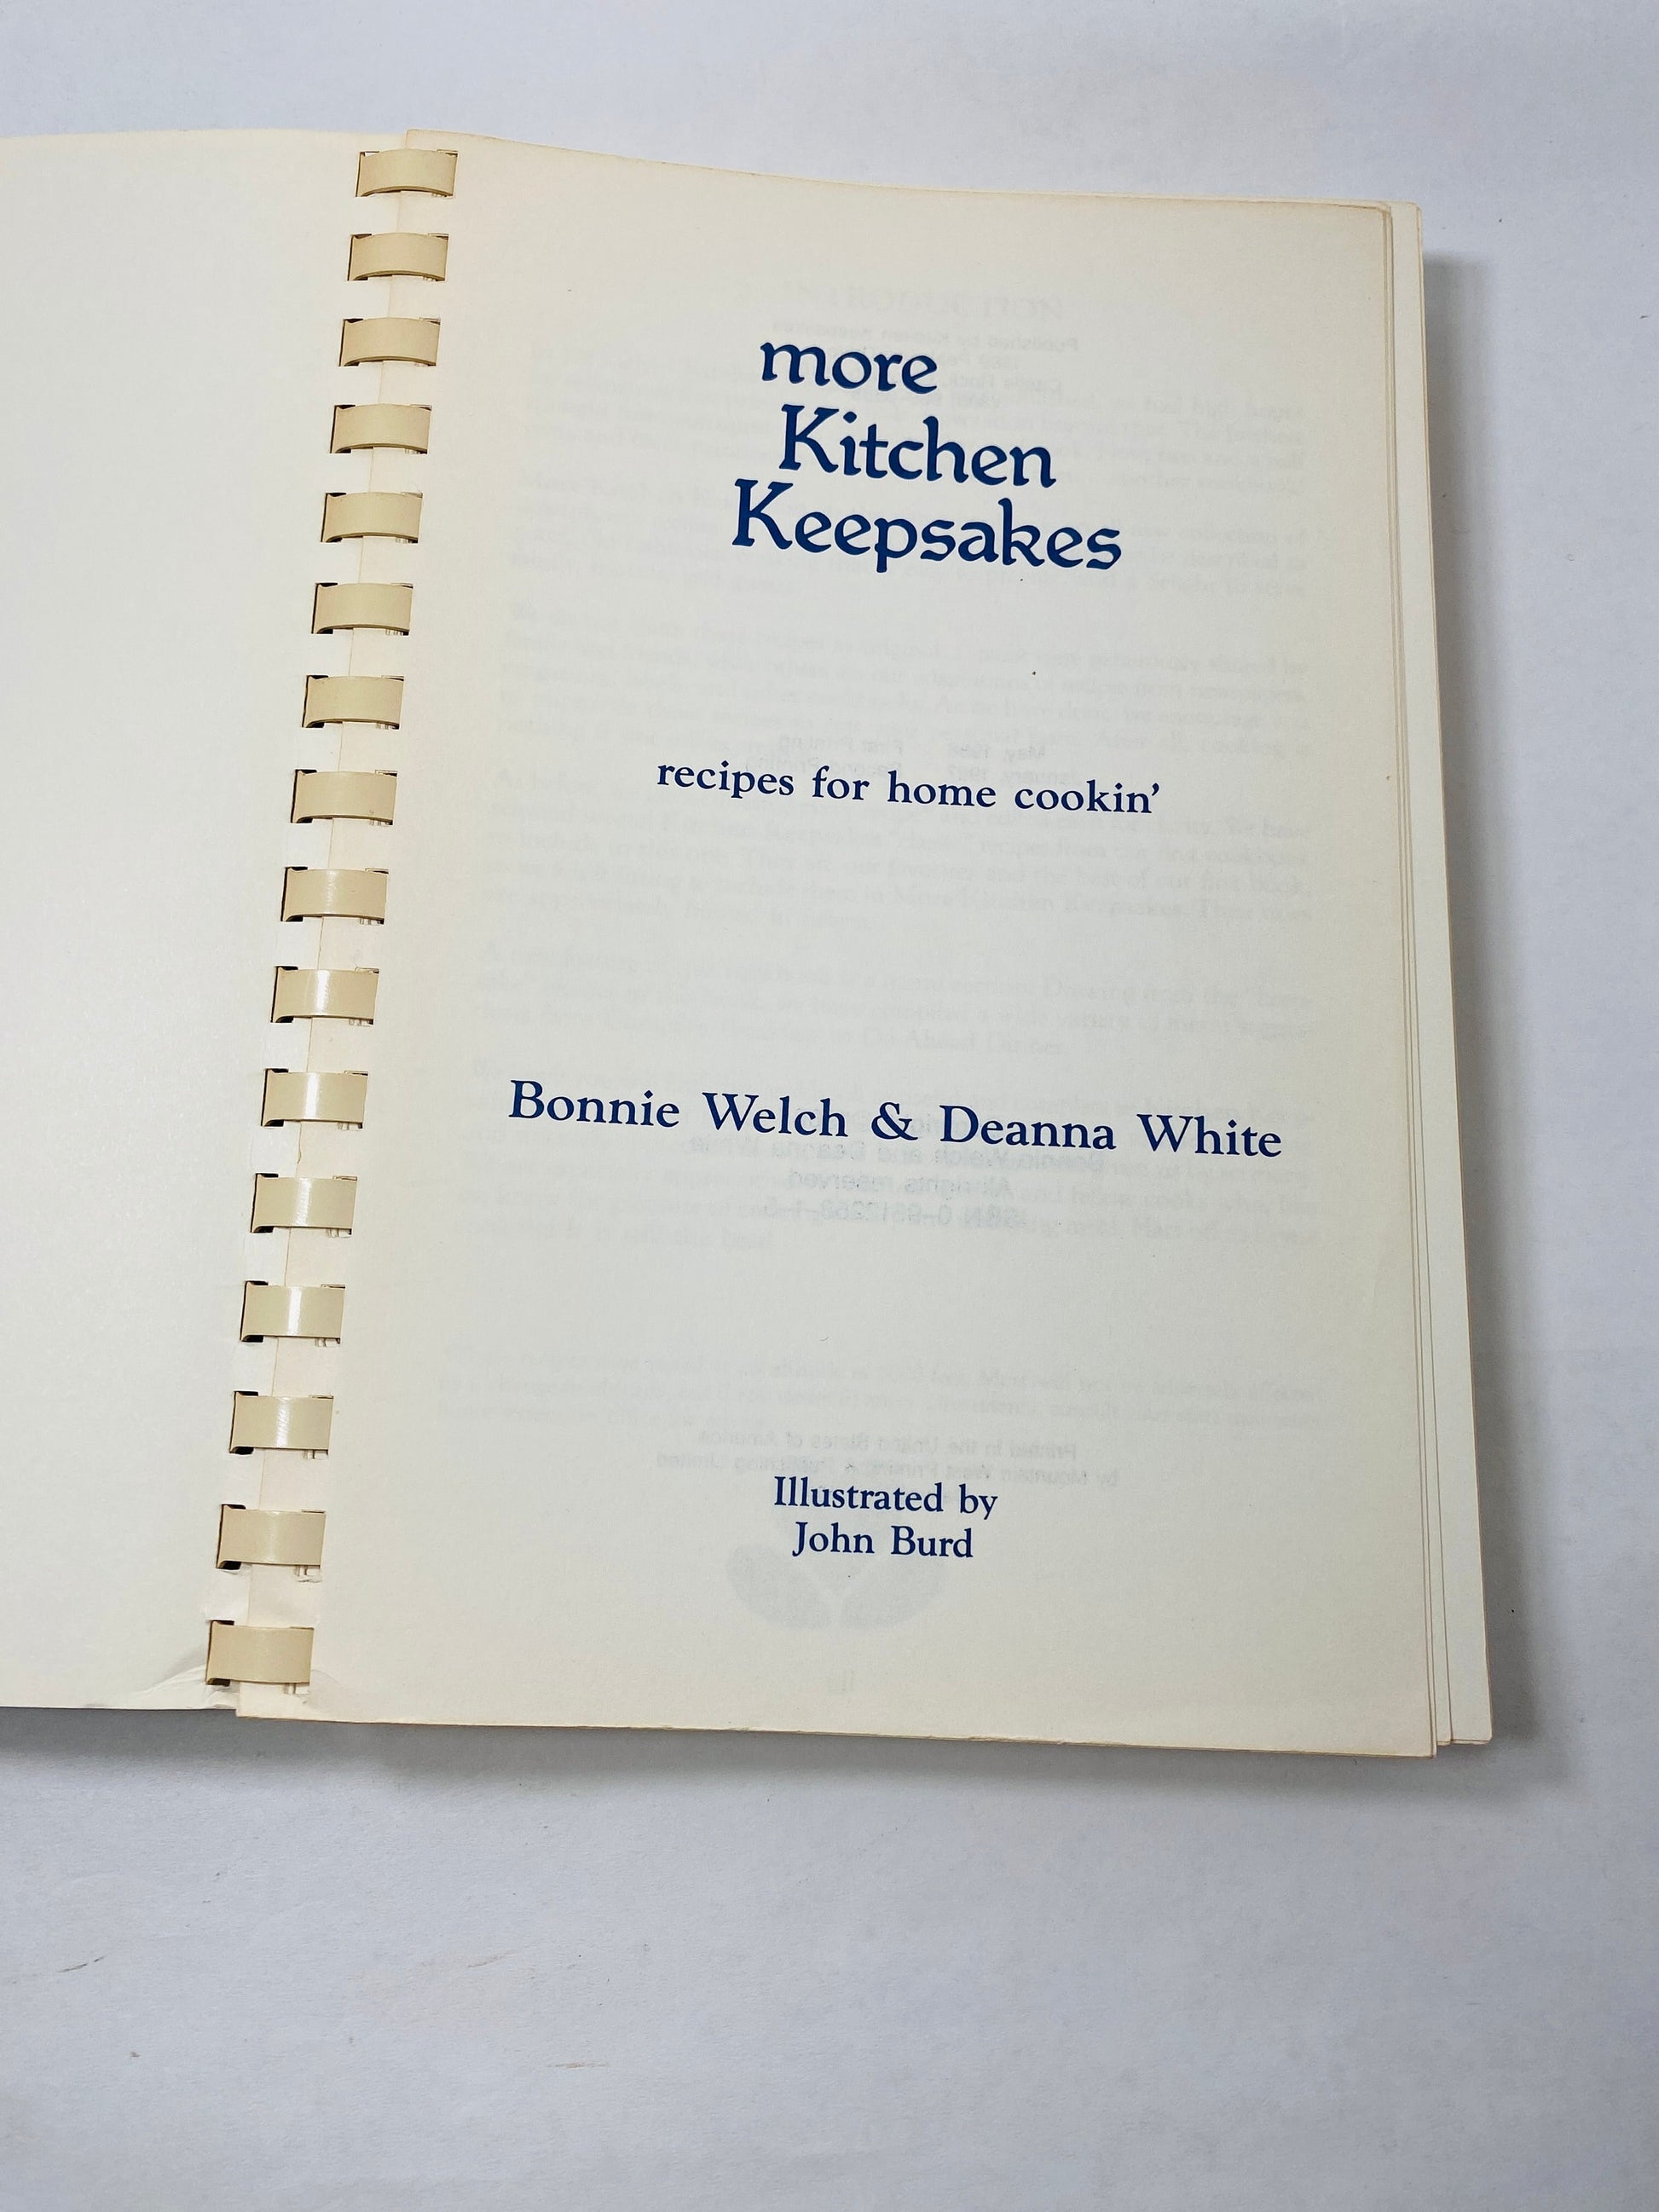 More Kitchen Keepsakes Cookbook EARLY PRINTING Vintage cookbook circa 1986 by Bonnie Welch. Family-Style Cooking